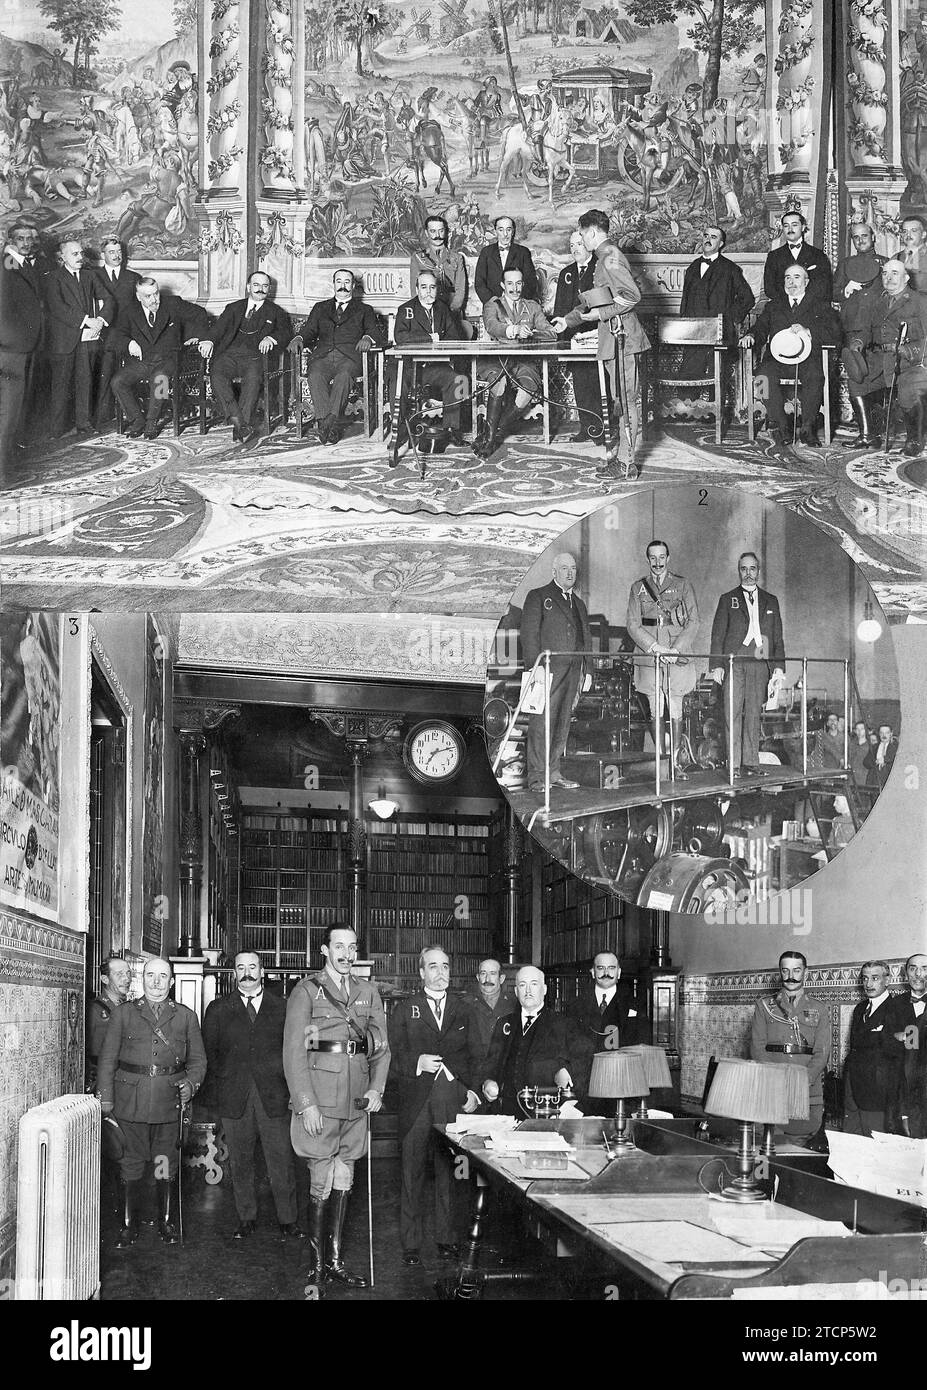 07/06/1922. Large Format - King Alfonso , during the Distribution. In the photo below in the Abc Editorial Office: the King (1), Sánchez Guerra (2), Generals Orozco (3), Burguete (4), and Barrera (5), the governor of Madrid Mr. Bullon (6), the Mayor , Count of Valle Suchil (7), Lord Luca de Tena (8). Credit: Album / Archivo ABC / Larregla Stock Photo